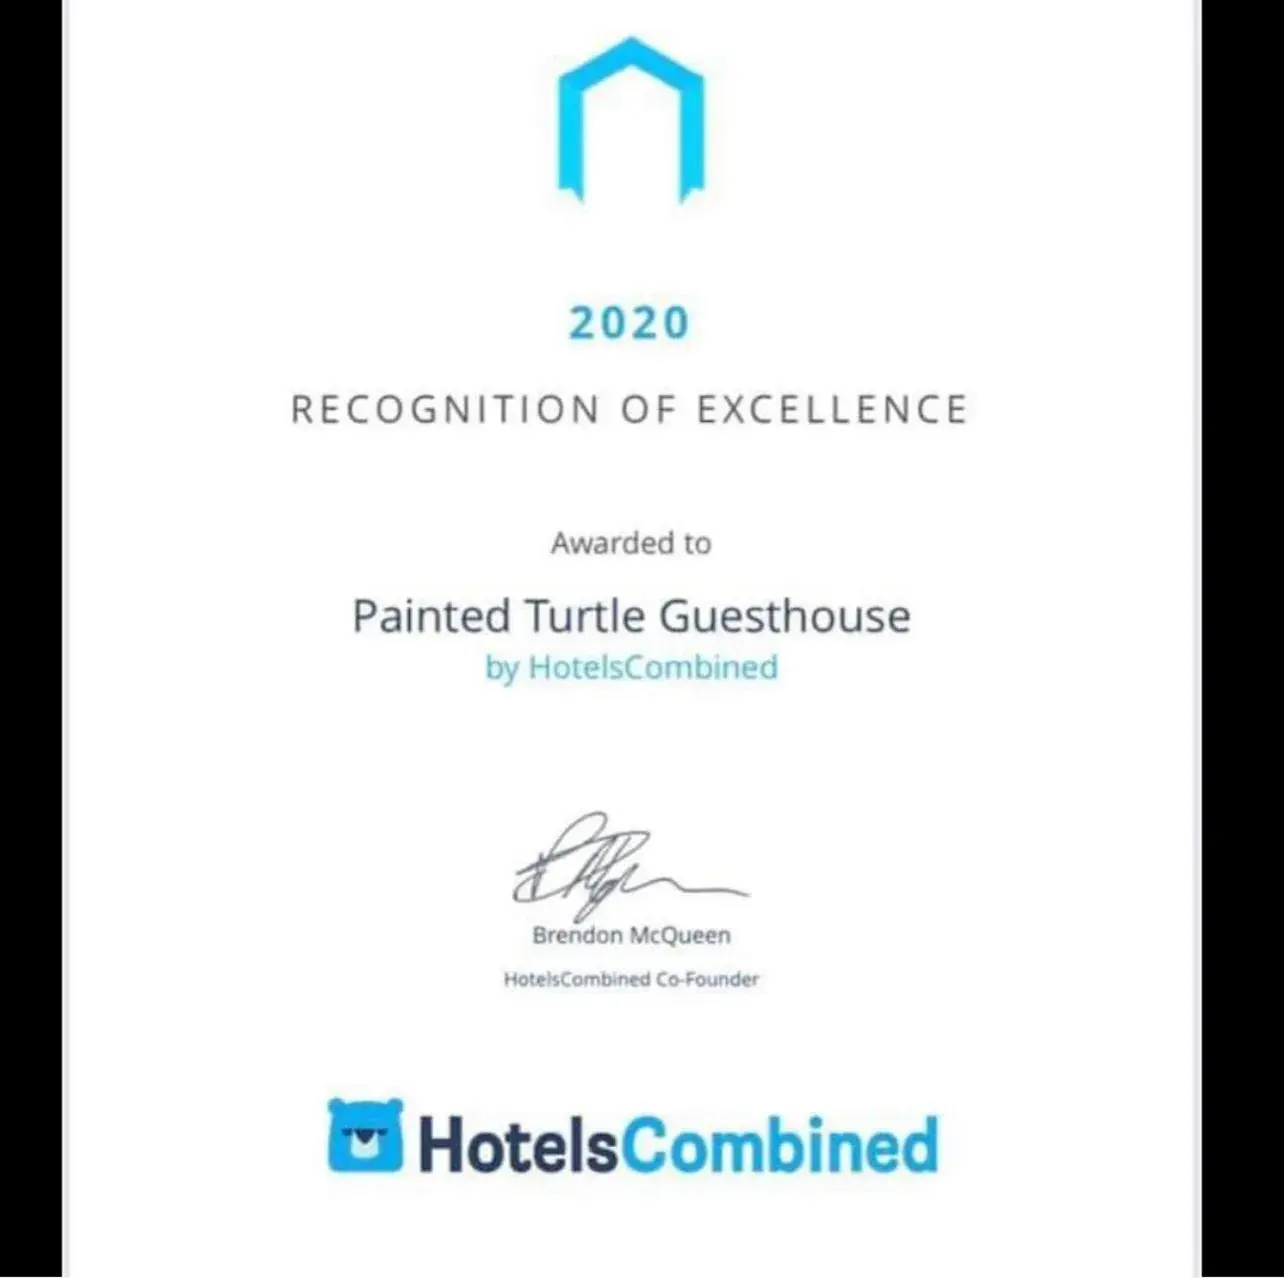 Certificate/Award in Painted Turtle Guesthouse